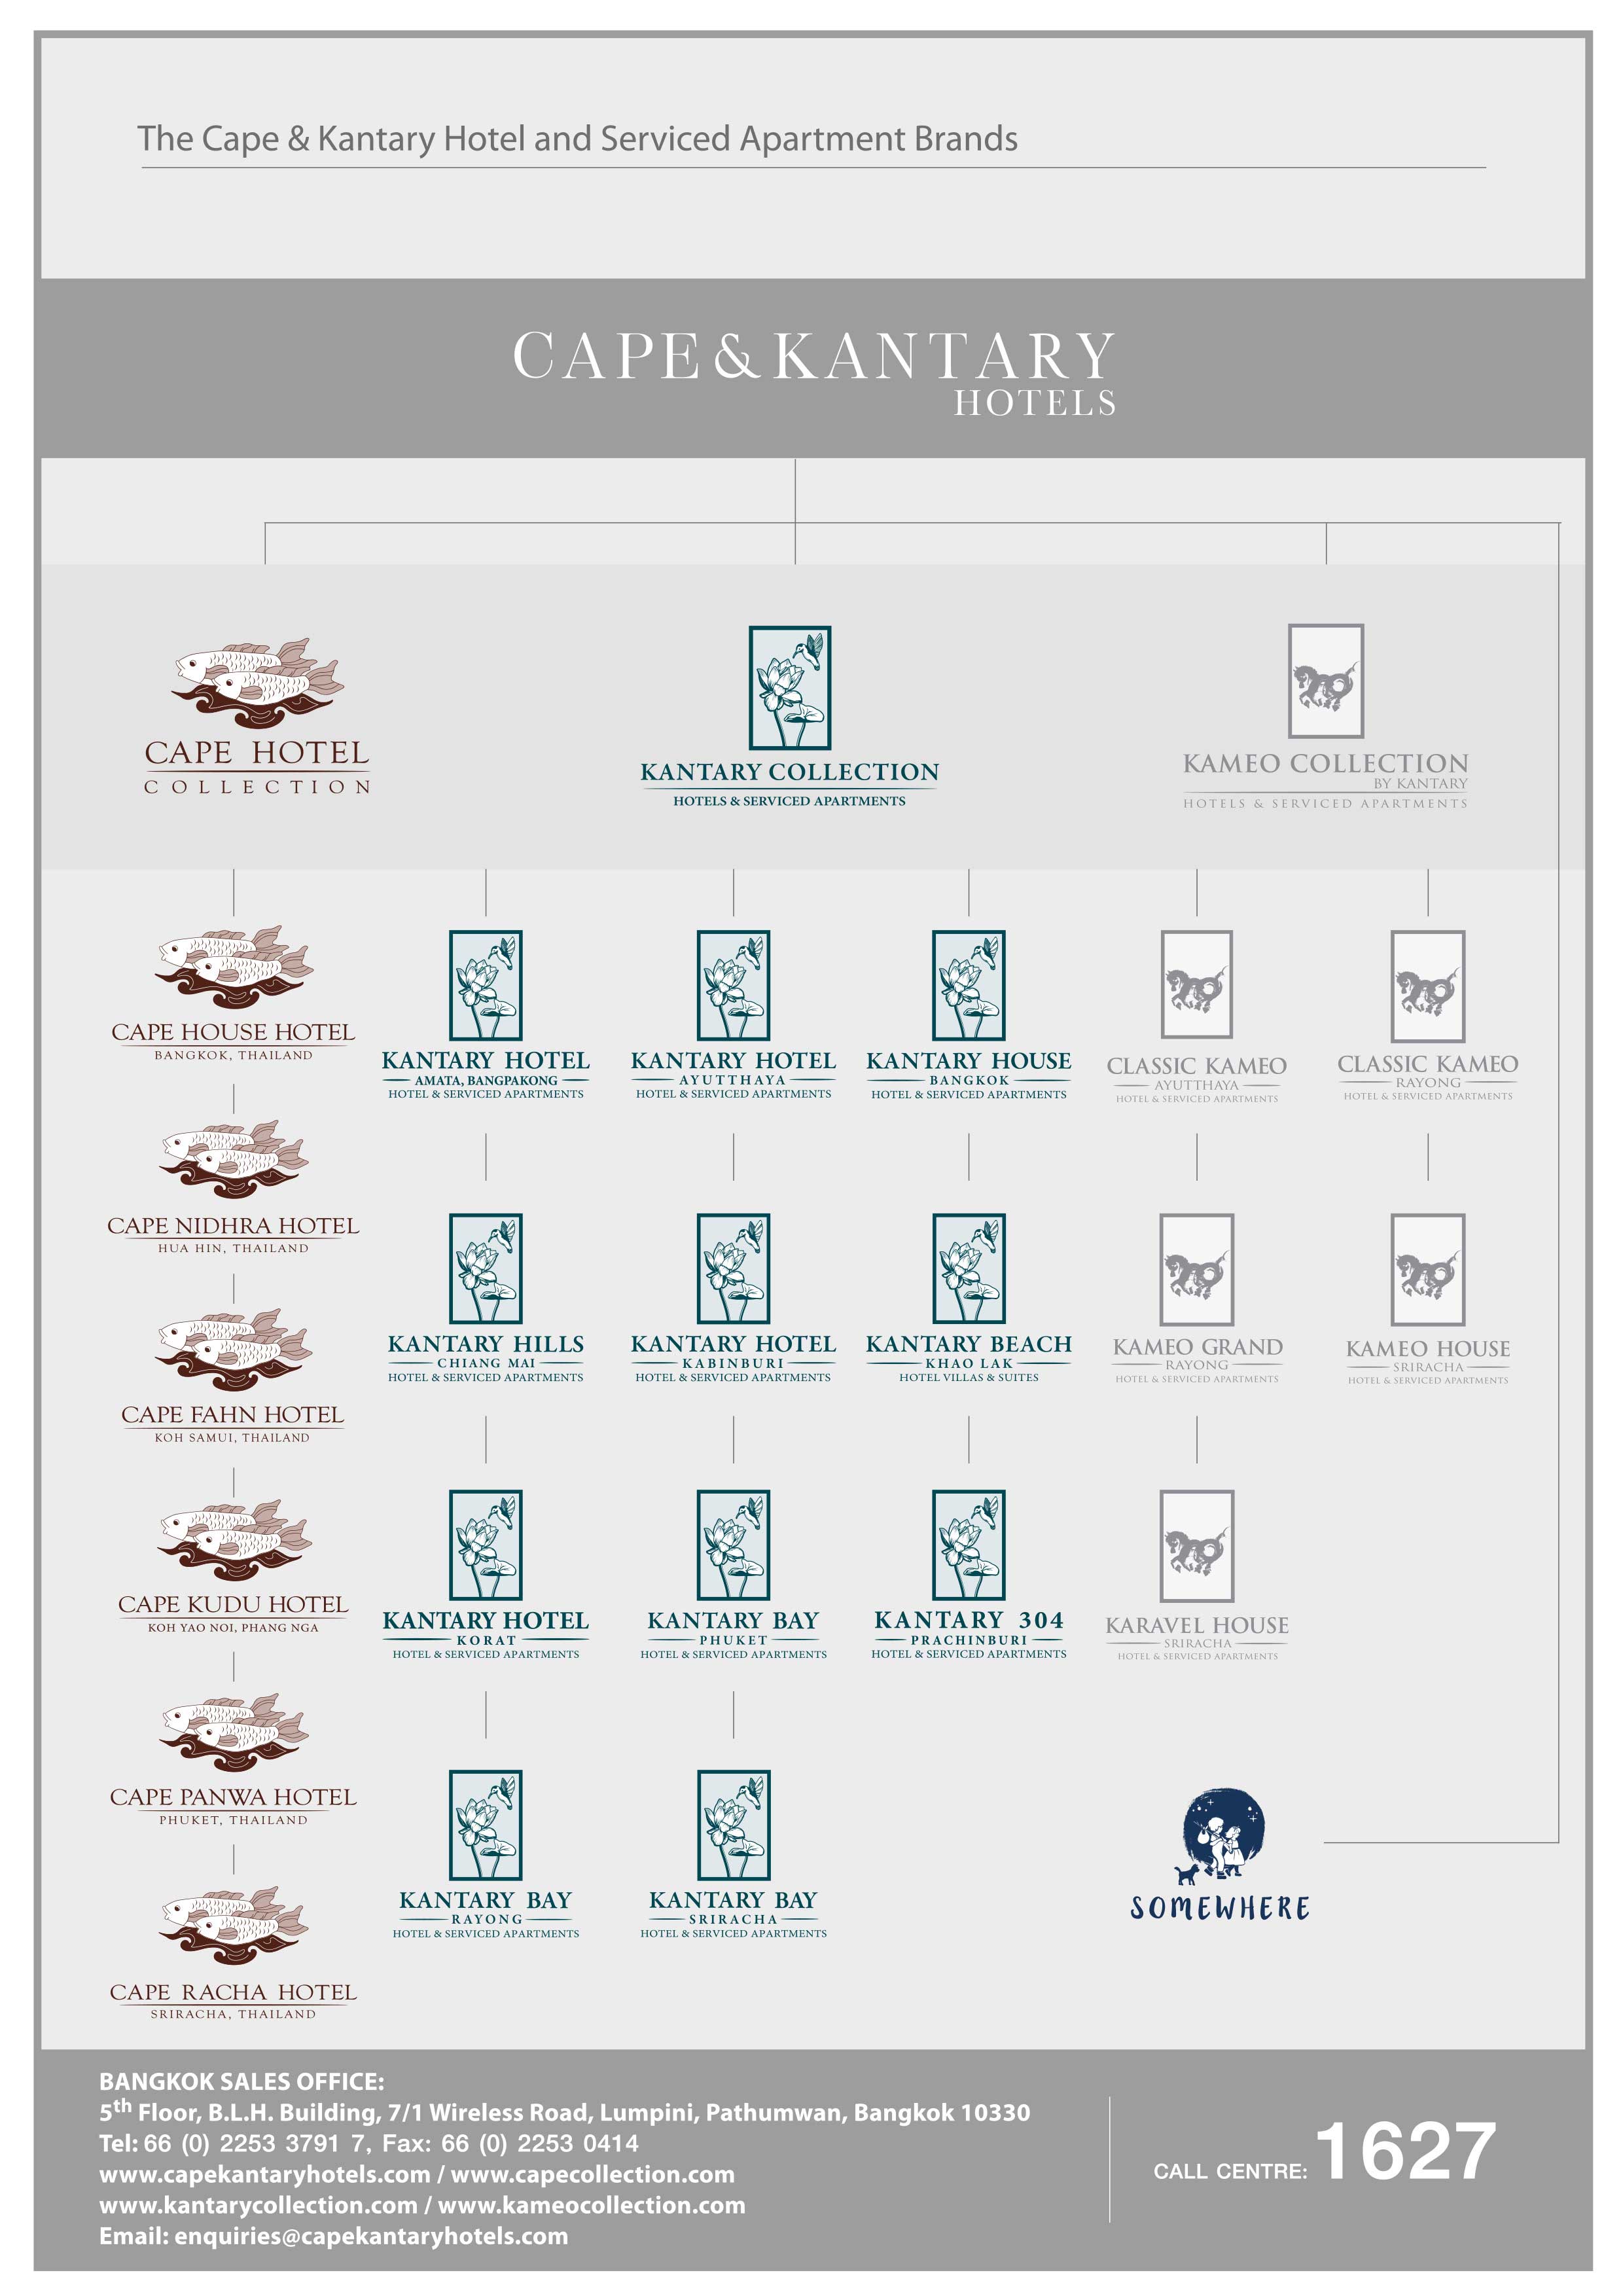 The Cape & Kantary Hotel and Serviced Apartment Brands